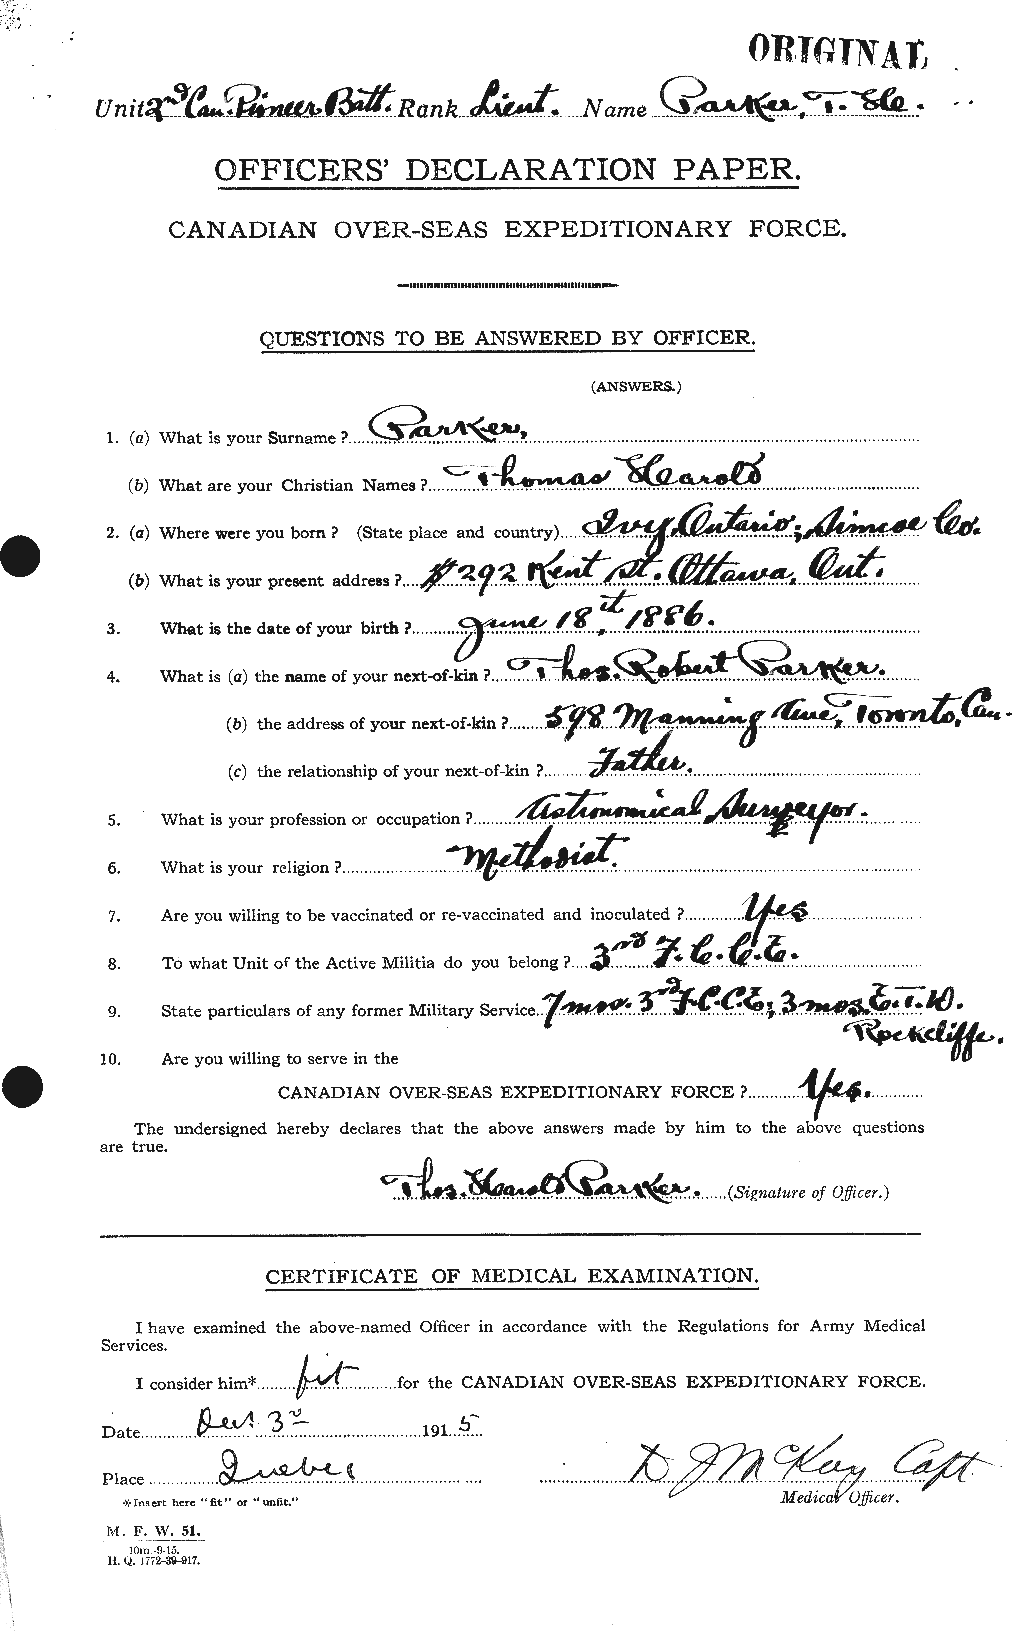 Personnel Records of the First World War - CEF 565665a